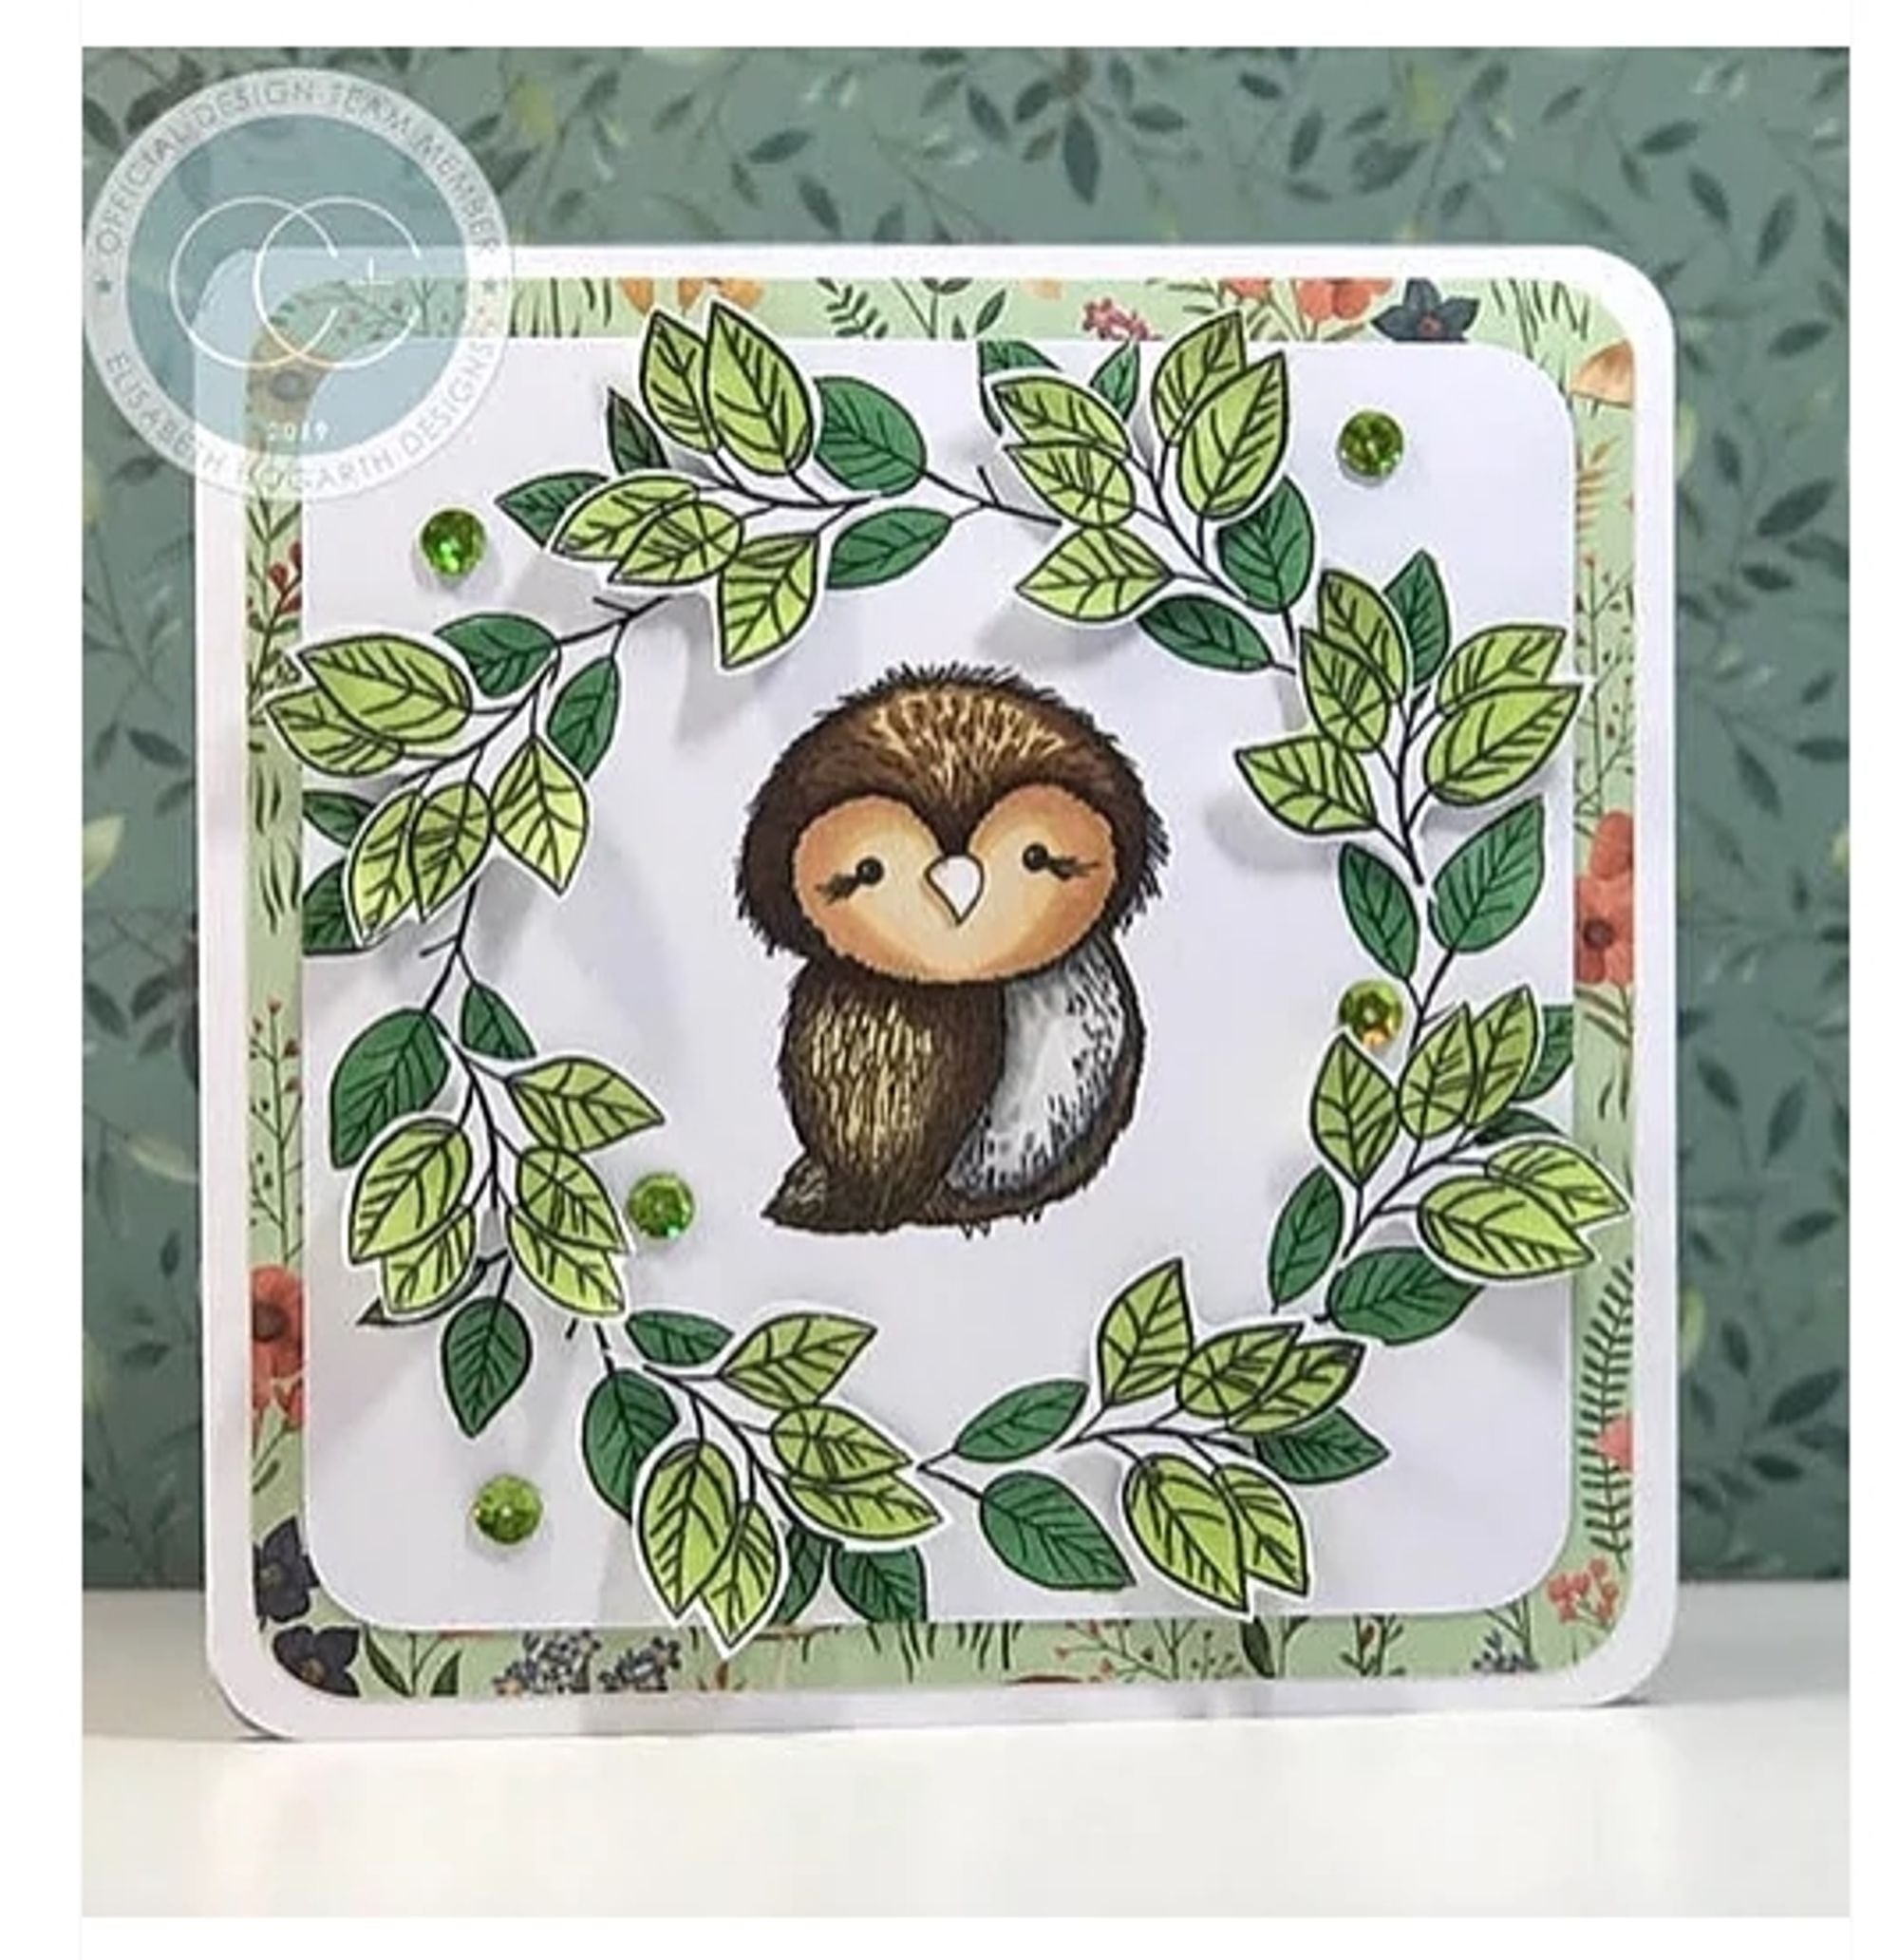 Over the Hedge - Stamp Set - Olivia the Owl